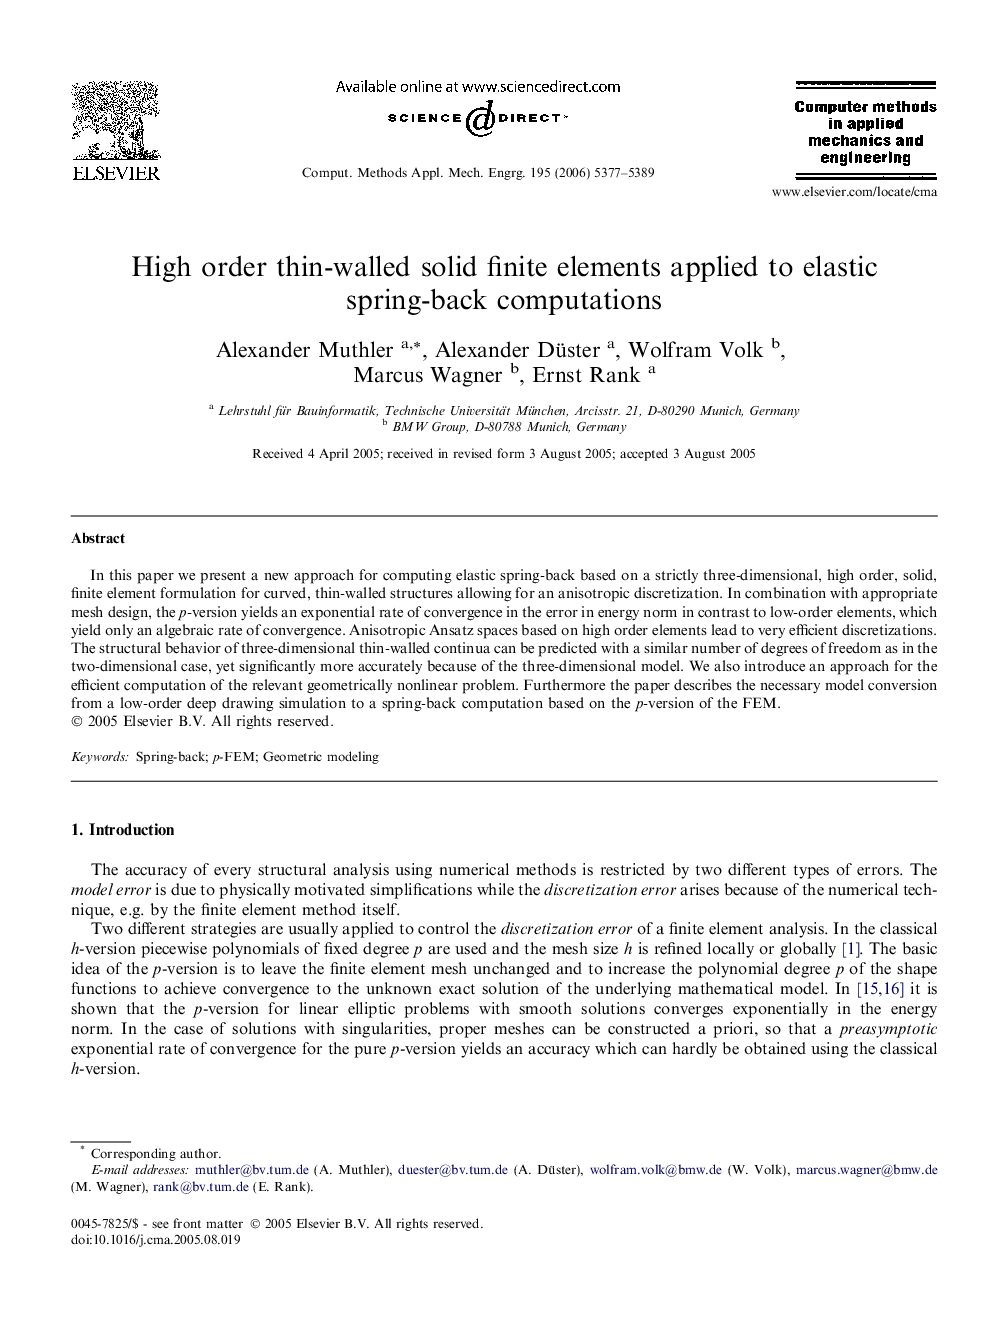 High order thin-walled solid finite elements applied to elastic spring-back computations